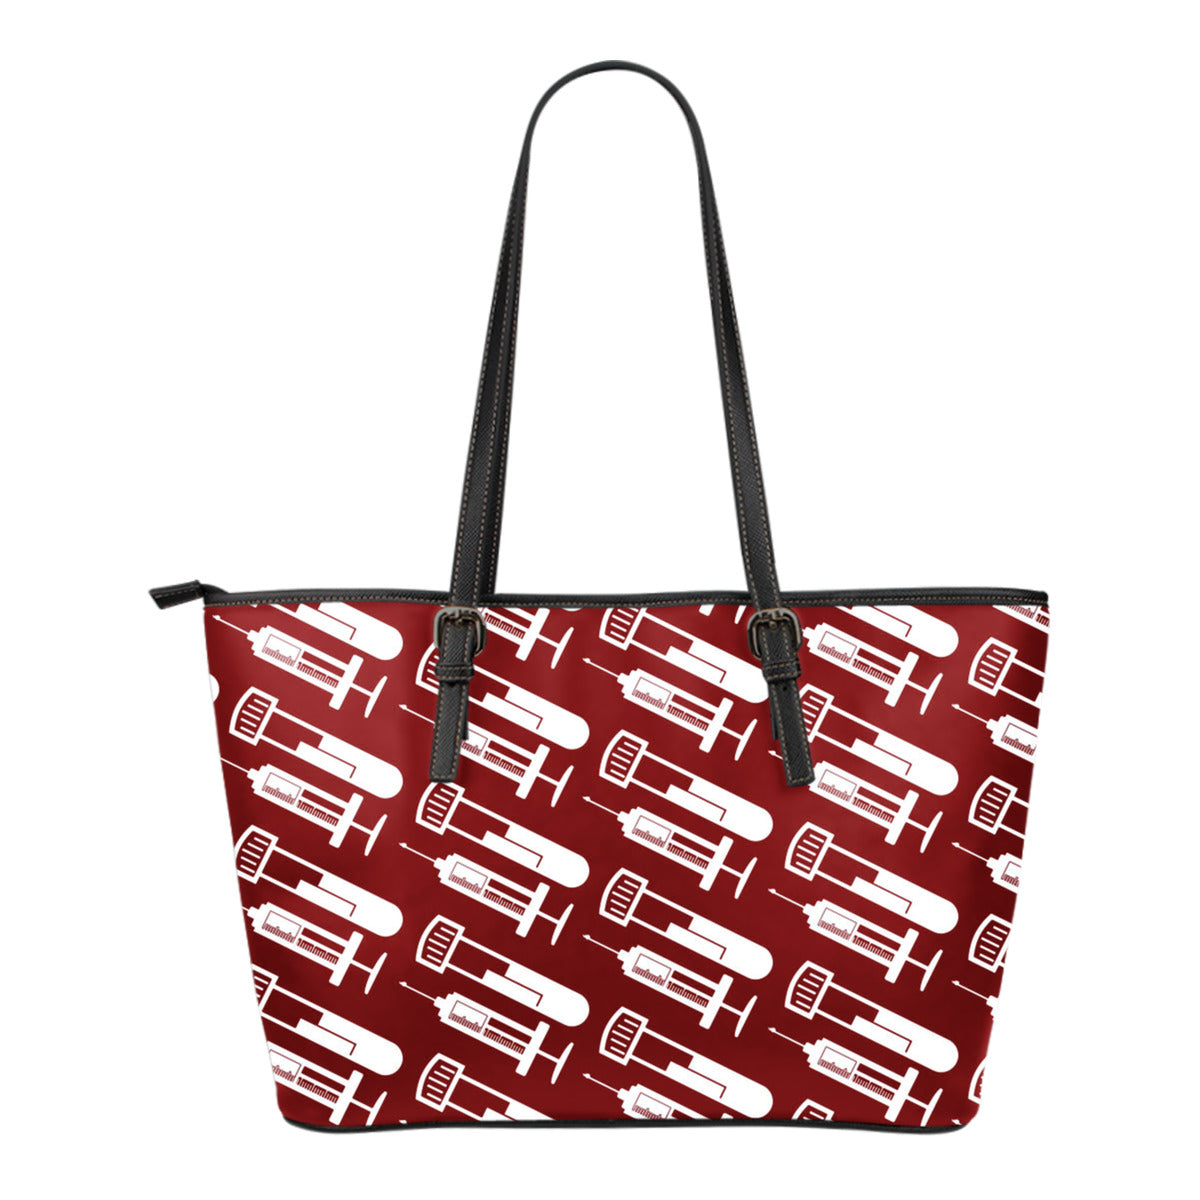 Phlebotomist Small Leather Tote Bag - JaZazzy 